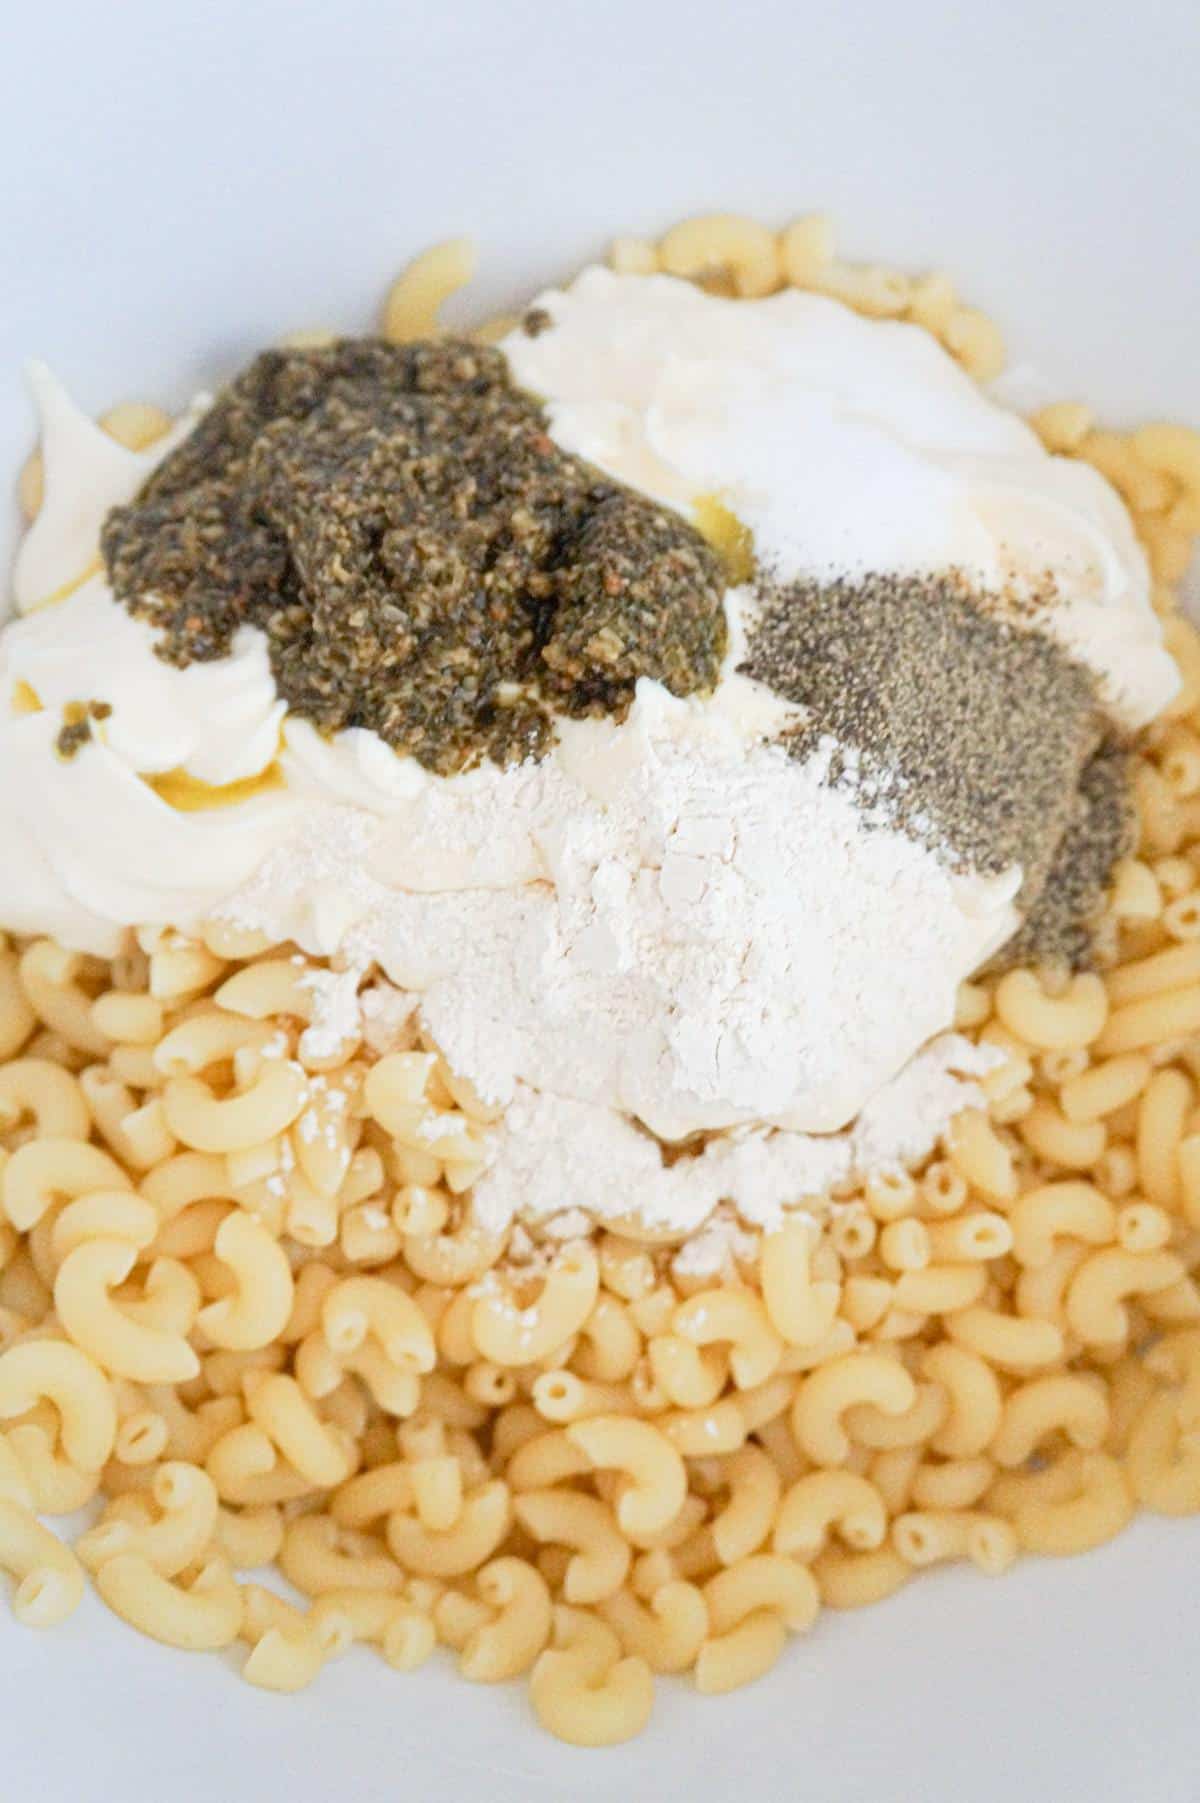 basil pesto, mayo and spices on top of cooked macaroni noodles in a mixing bowl